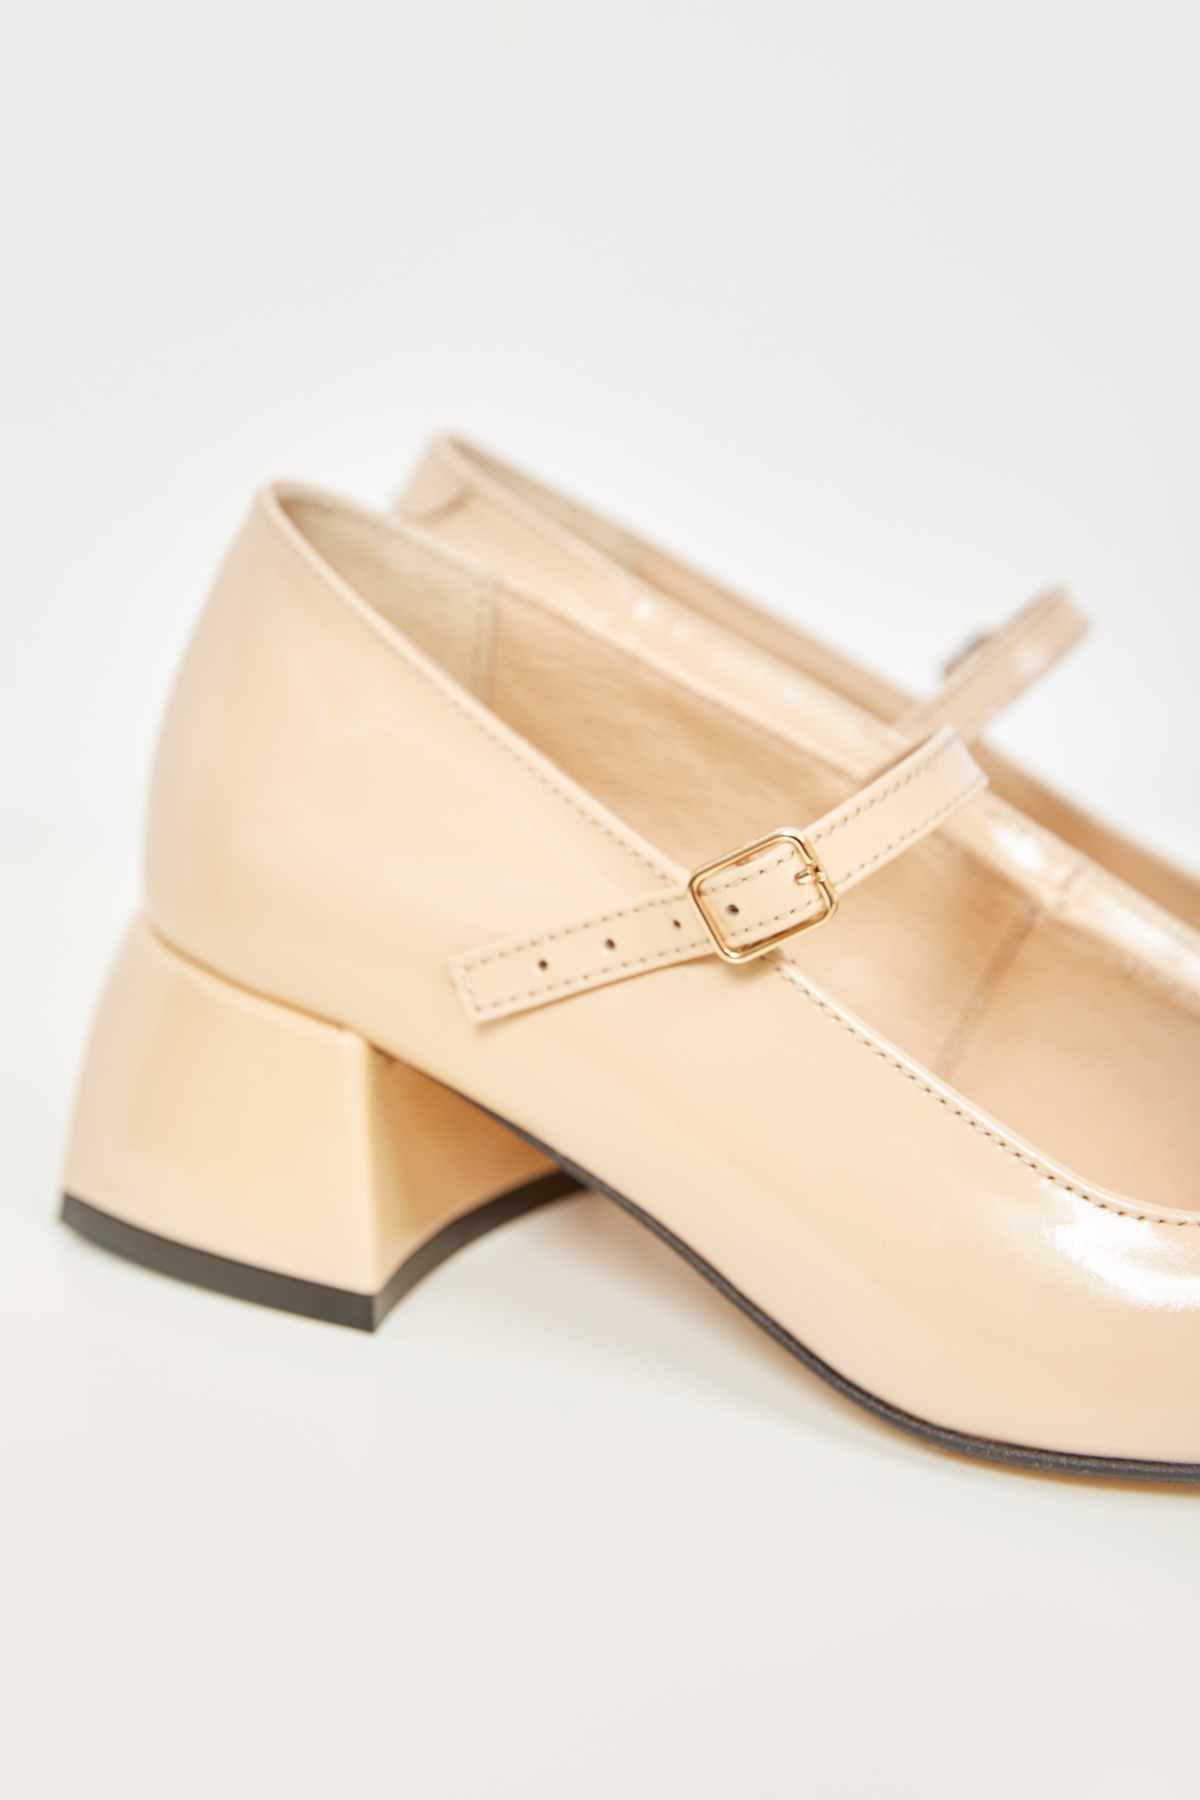 Beige patent leather shoes, photo 2